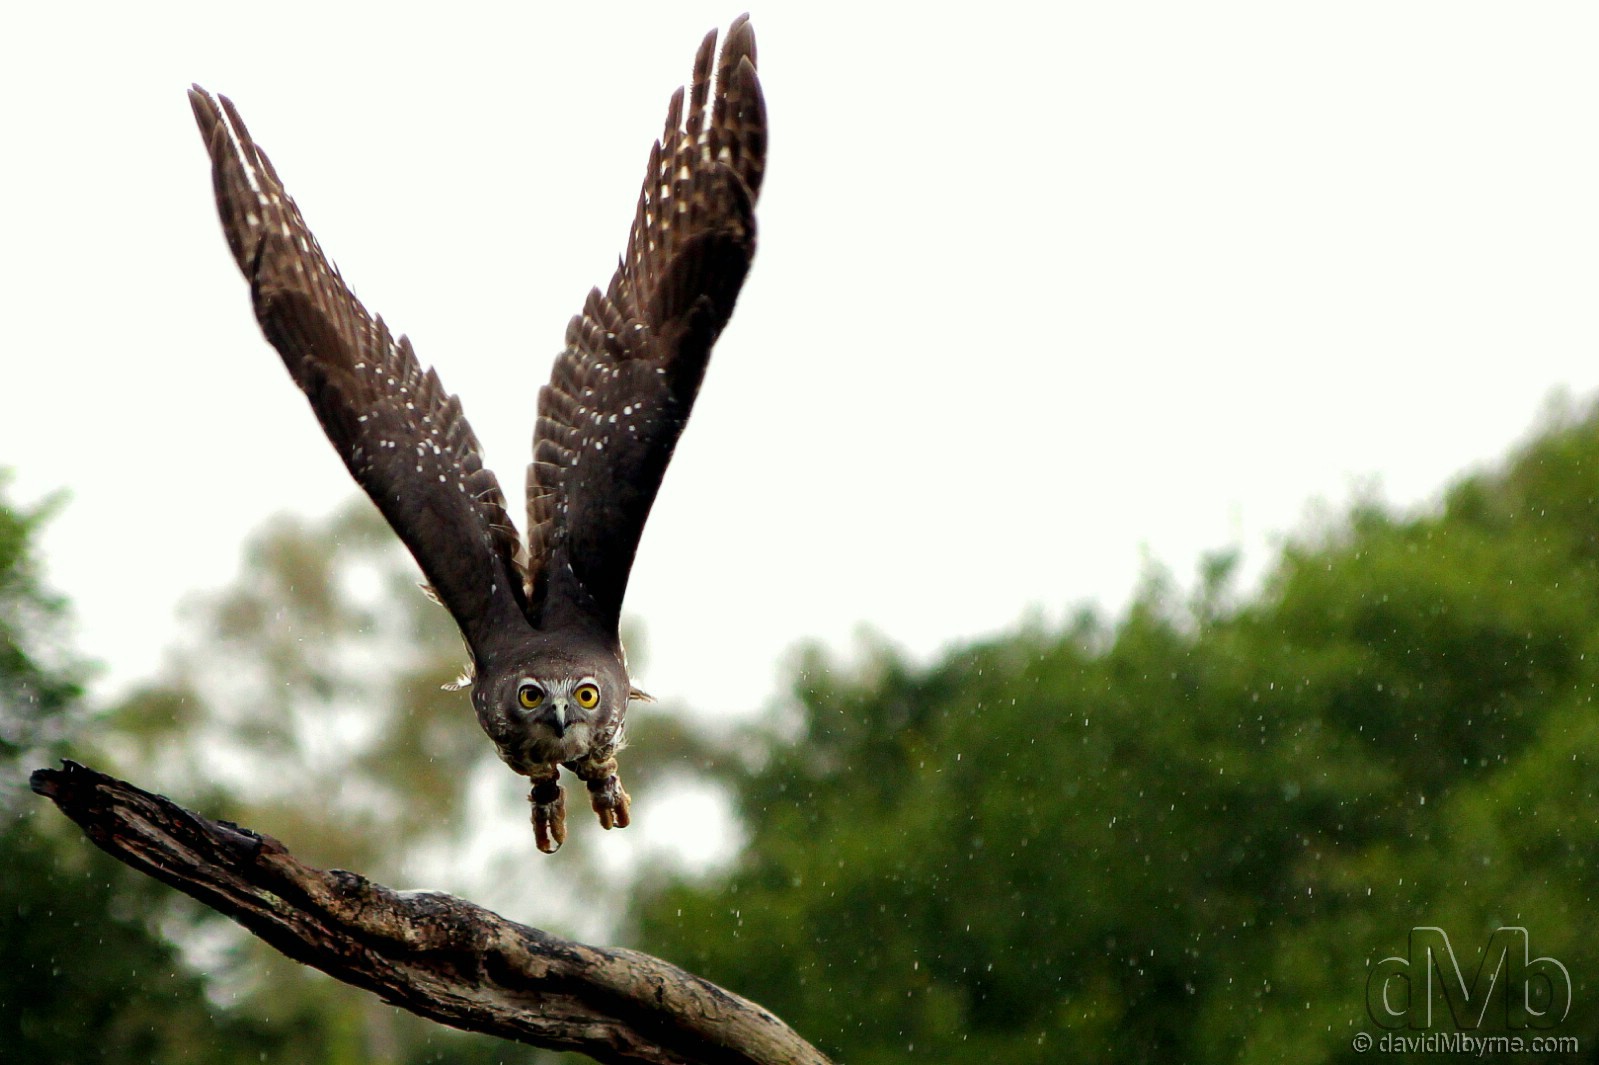 A Barking Owl in flight in light rain at the Lone Pine Koala Sanctuary on the outskirts of Brisbane, Queensland, Australia. April 15th, 2012 (EOS 60D || Tamron 28-75mm || 75mm, 1/1250sec, f/2.8, iso400)